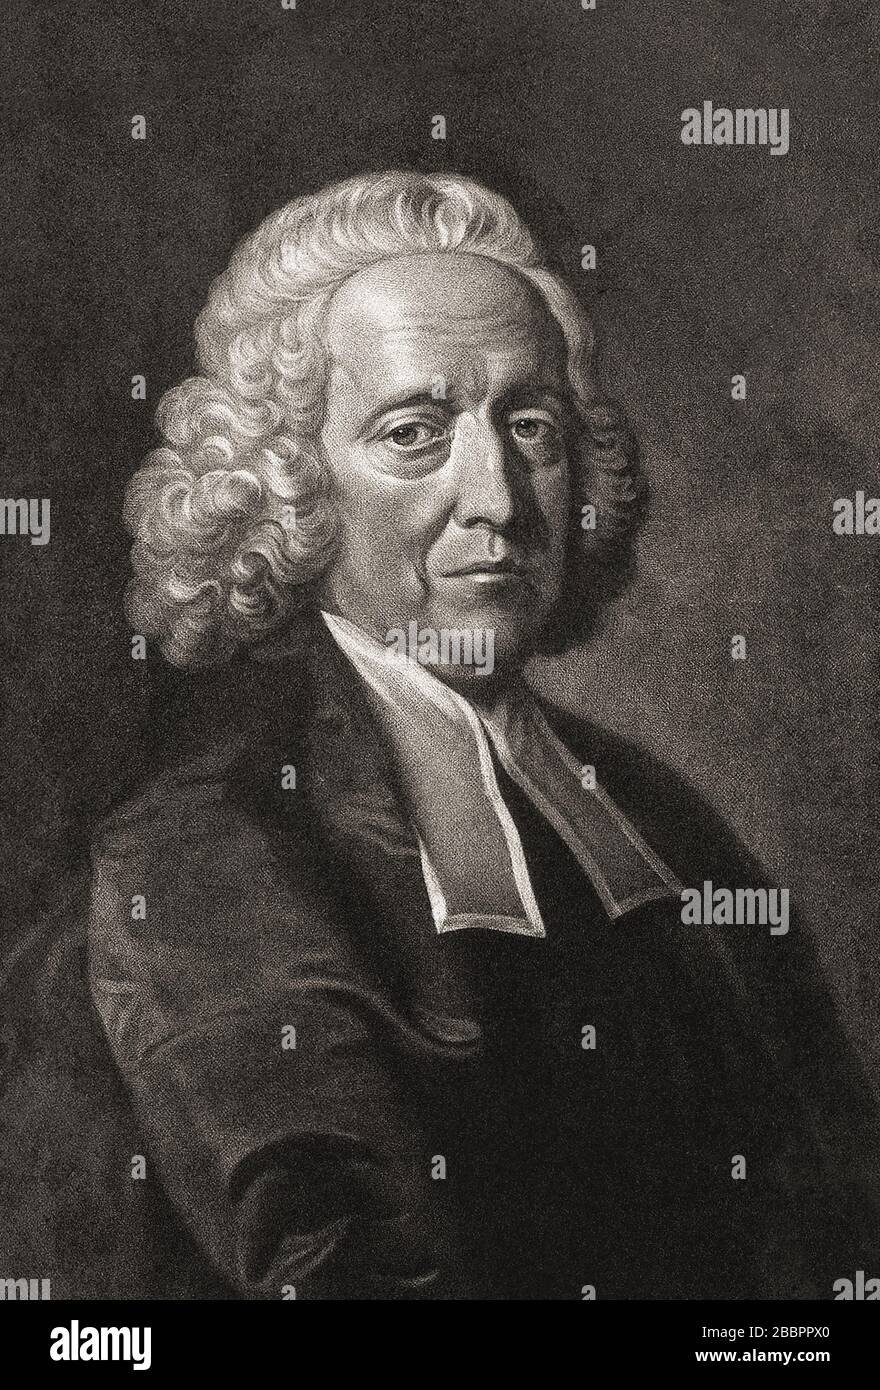 Stephen Hales, 1677 - 1761. English clergyman and scientist. Stock Photo